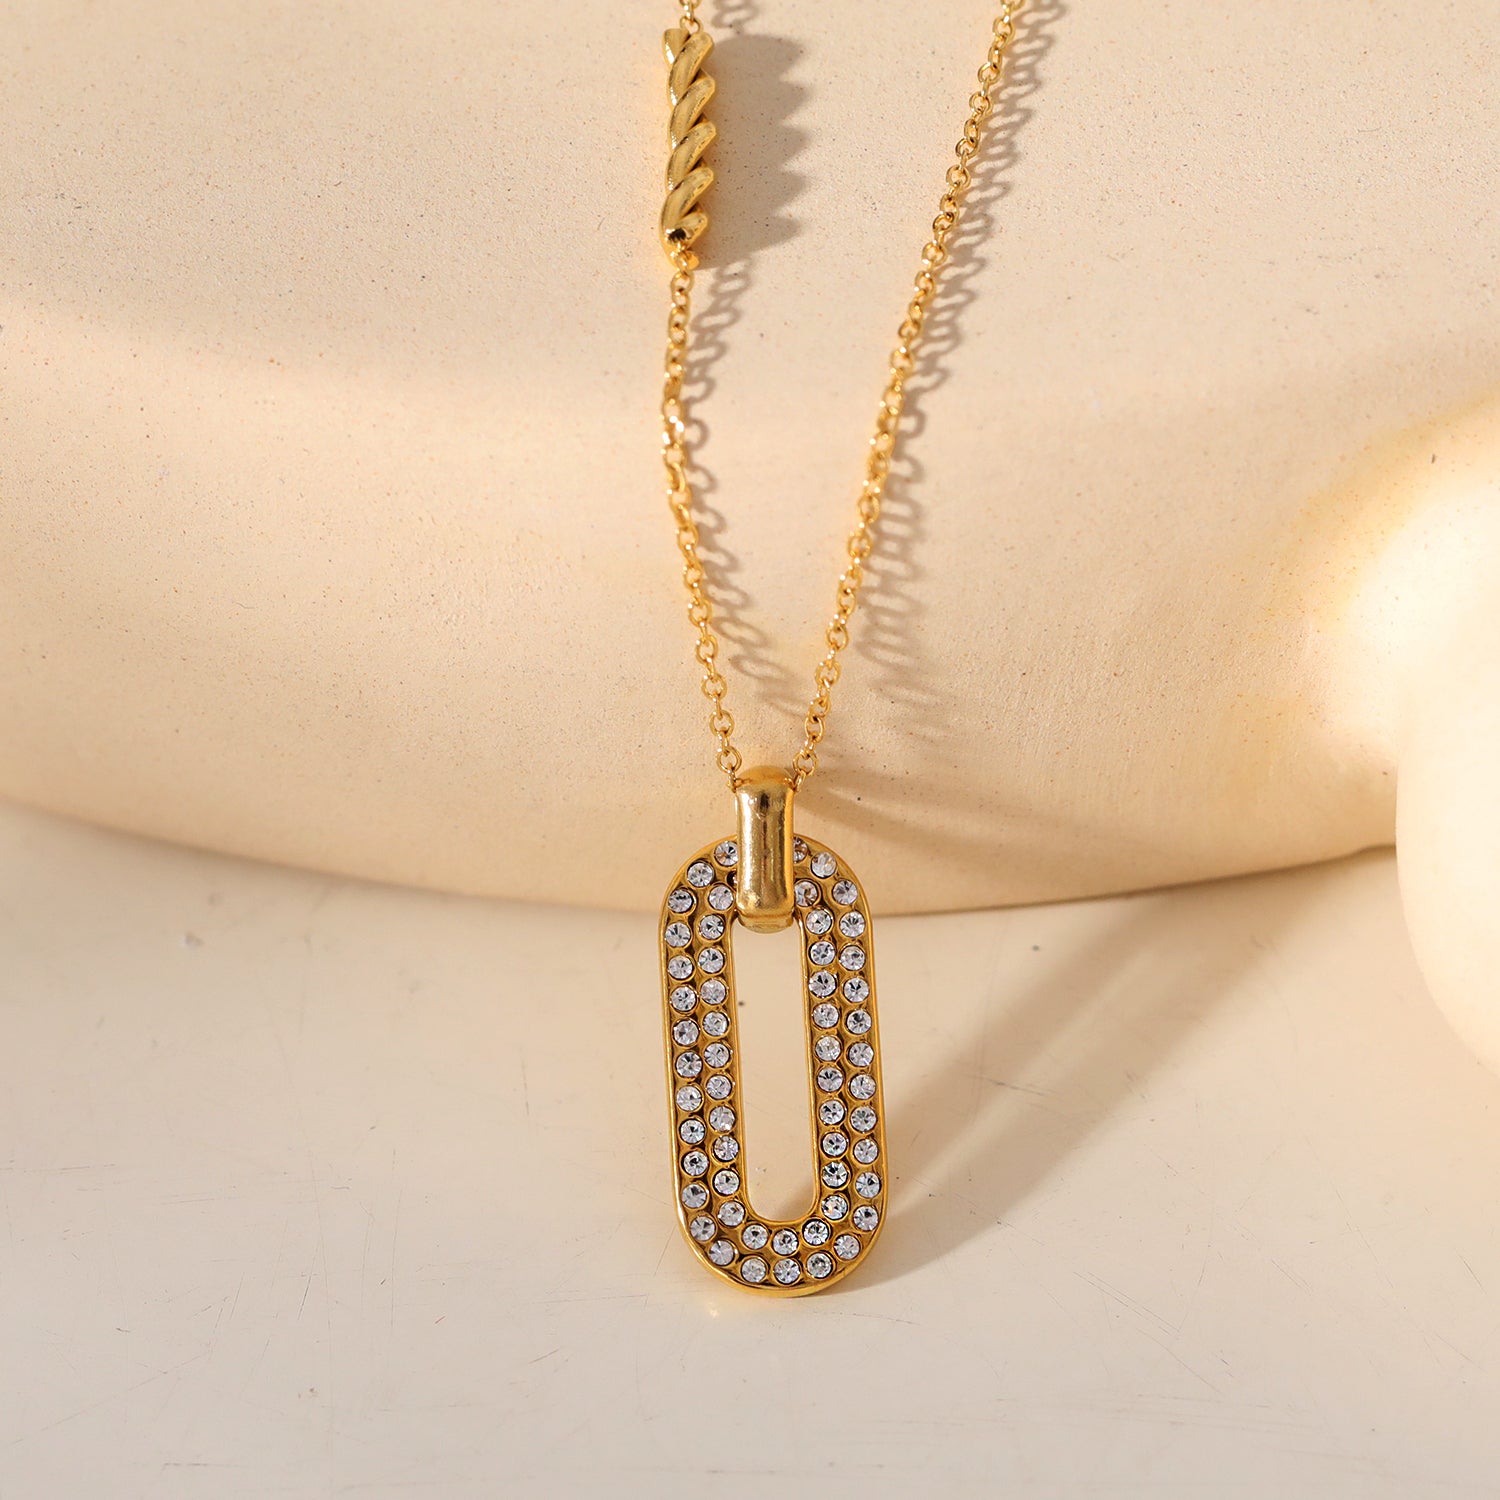 Style ASKIRA 05984: Twisted Rope Combo Chain with a Zirconia-Adorned Oval Shaped Pendant.